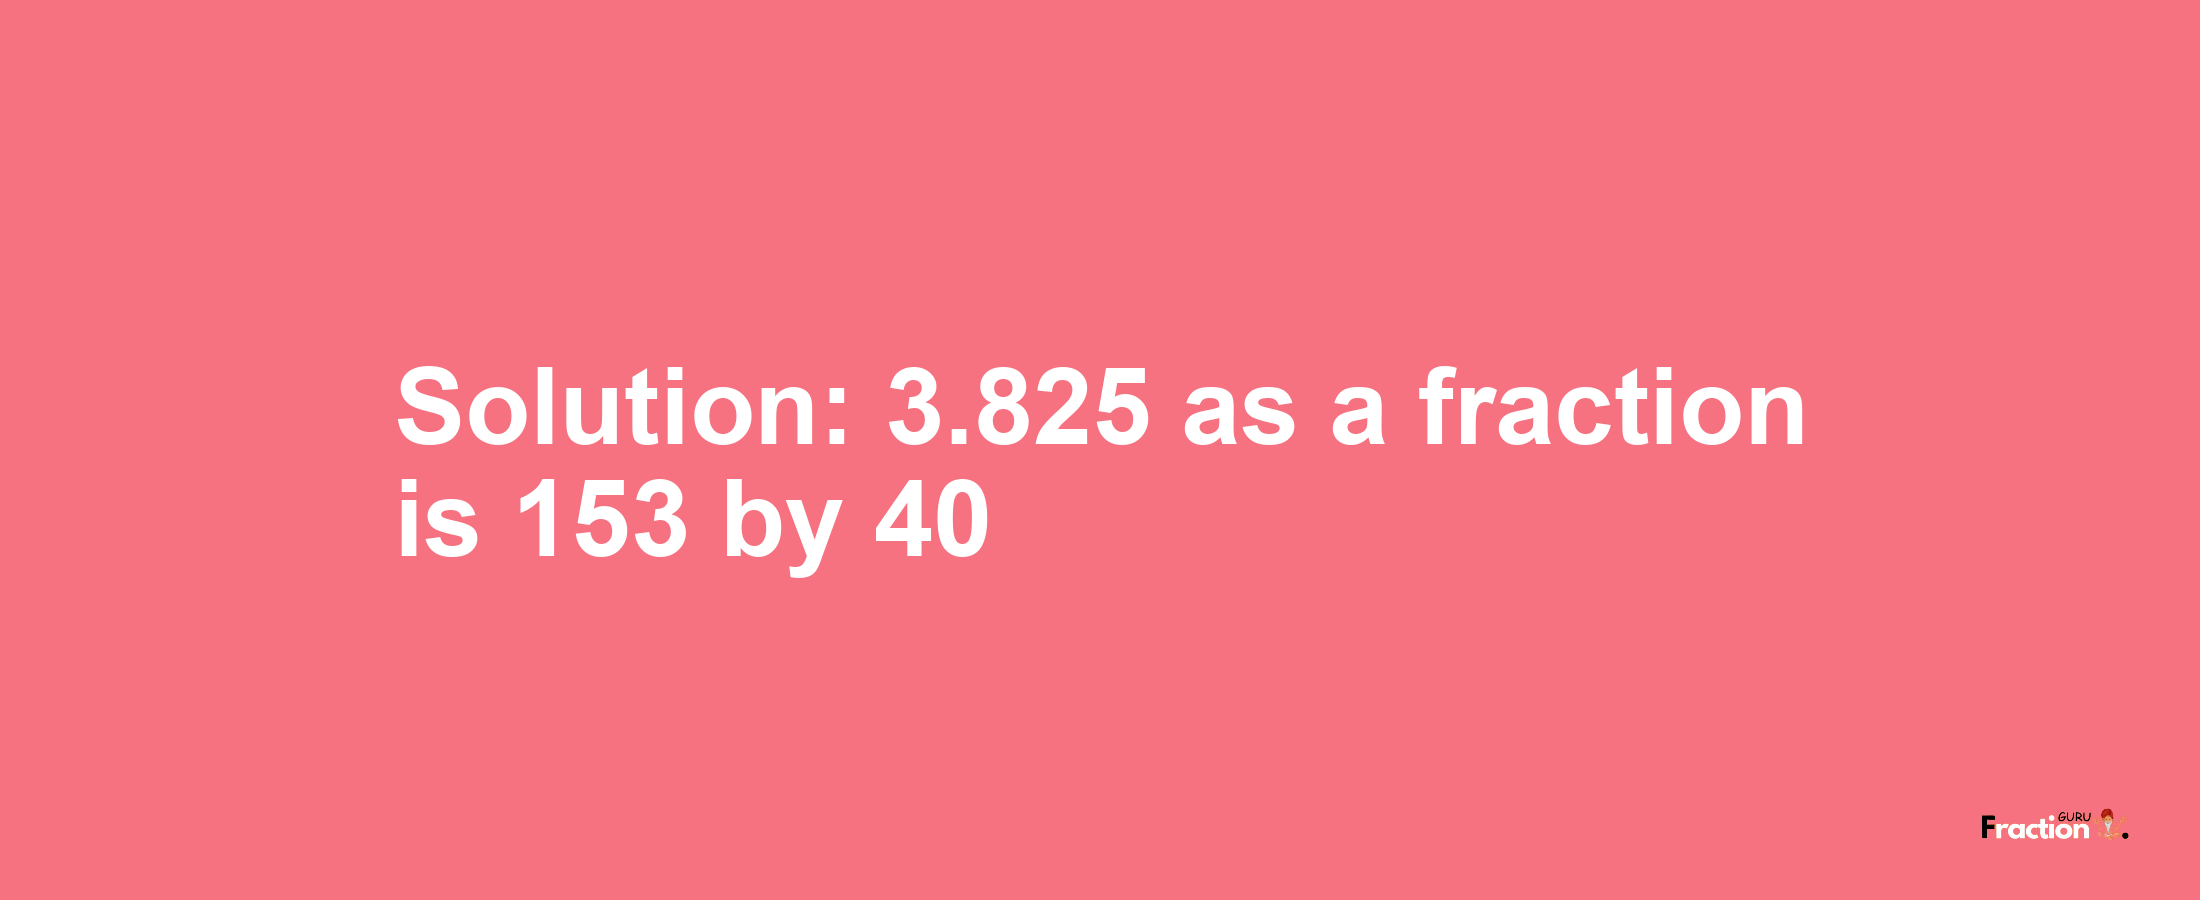 Solution:3.825 as a fraction is 153/40